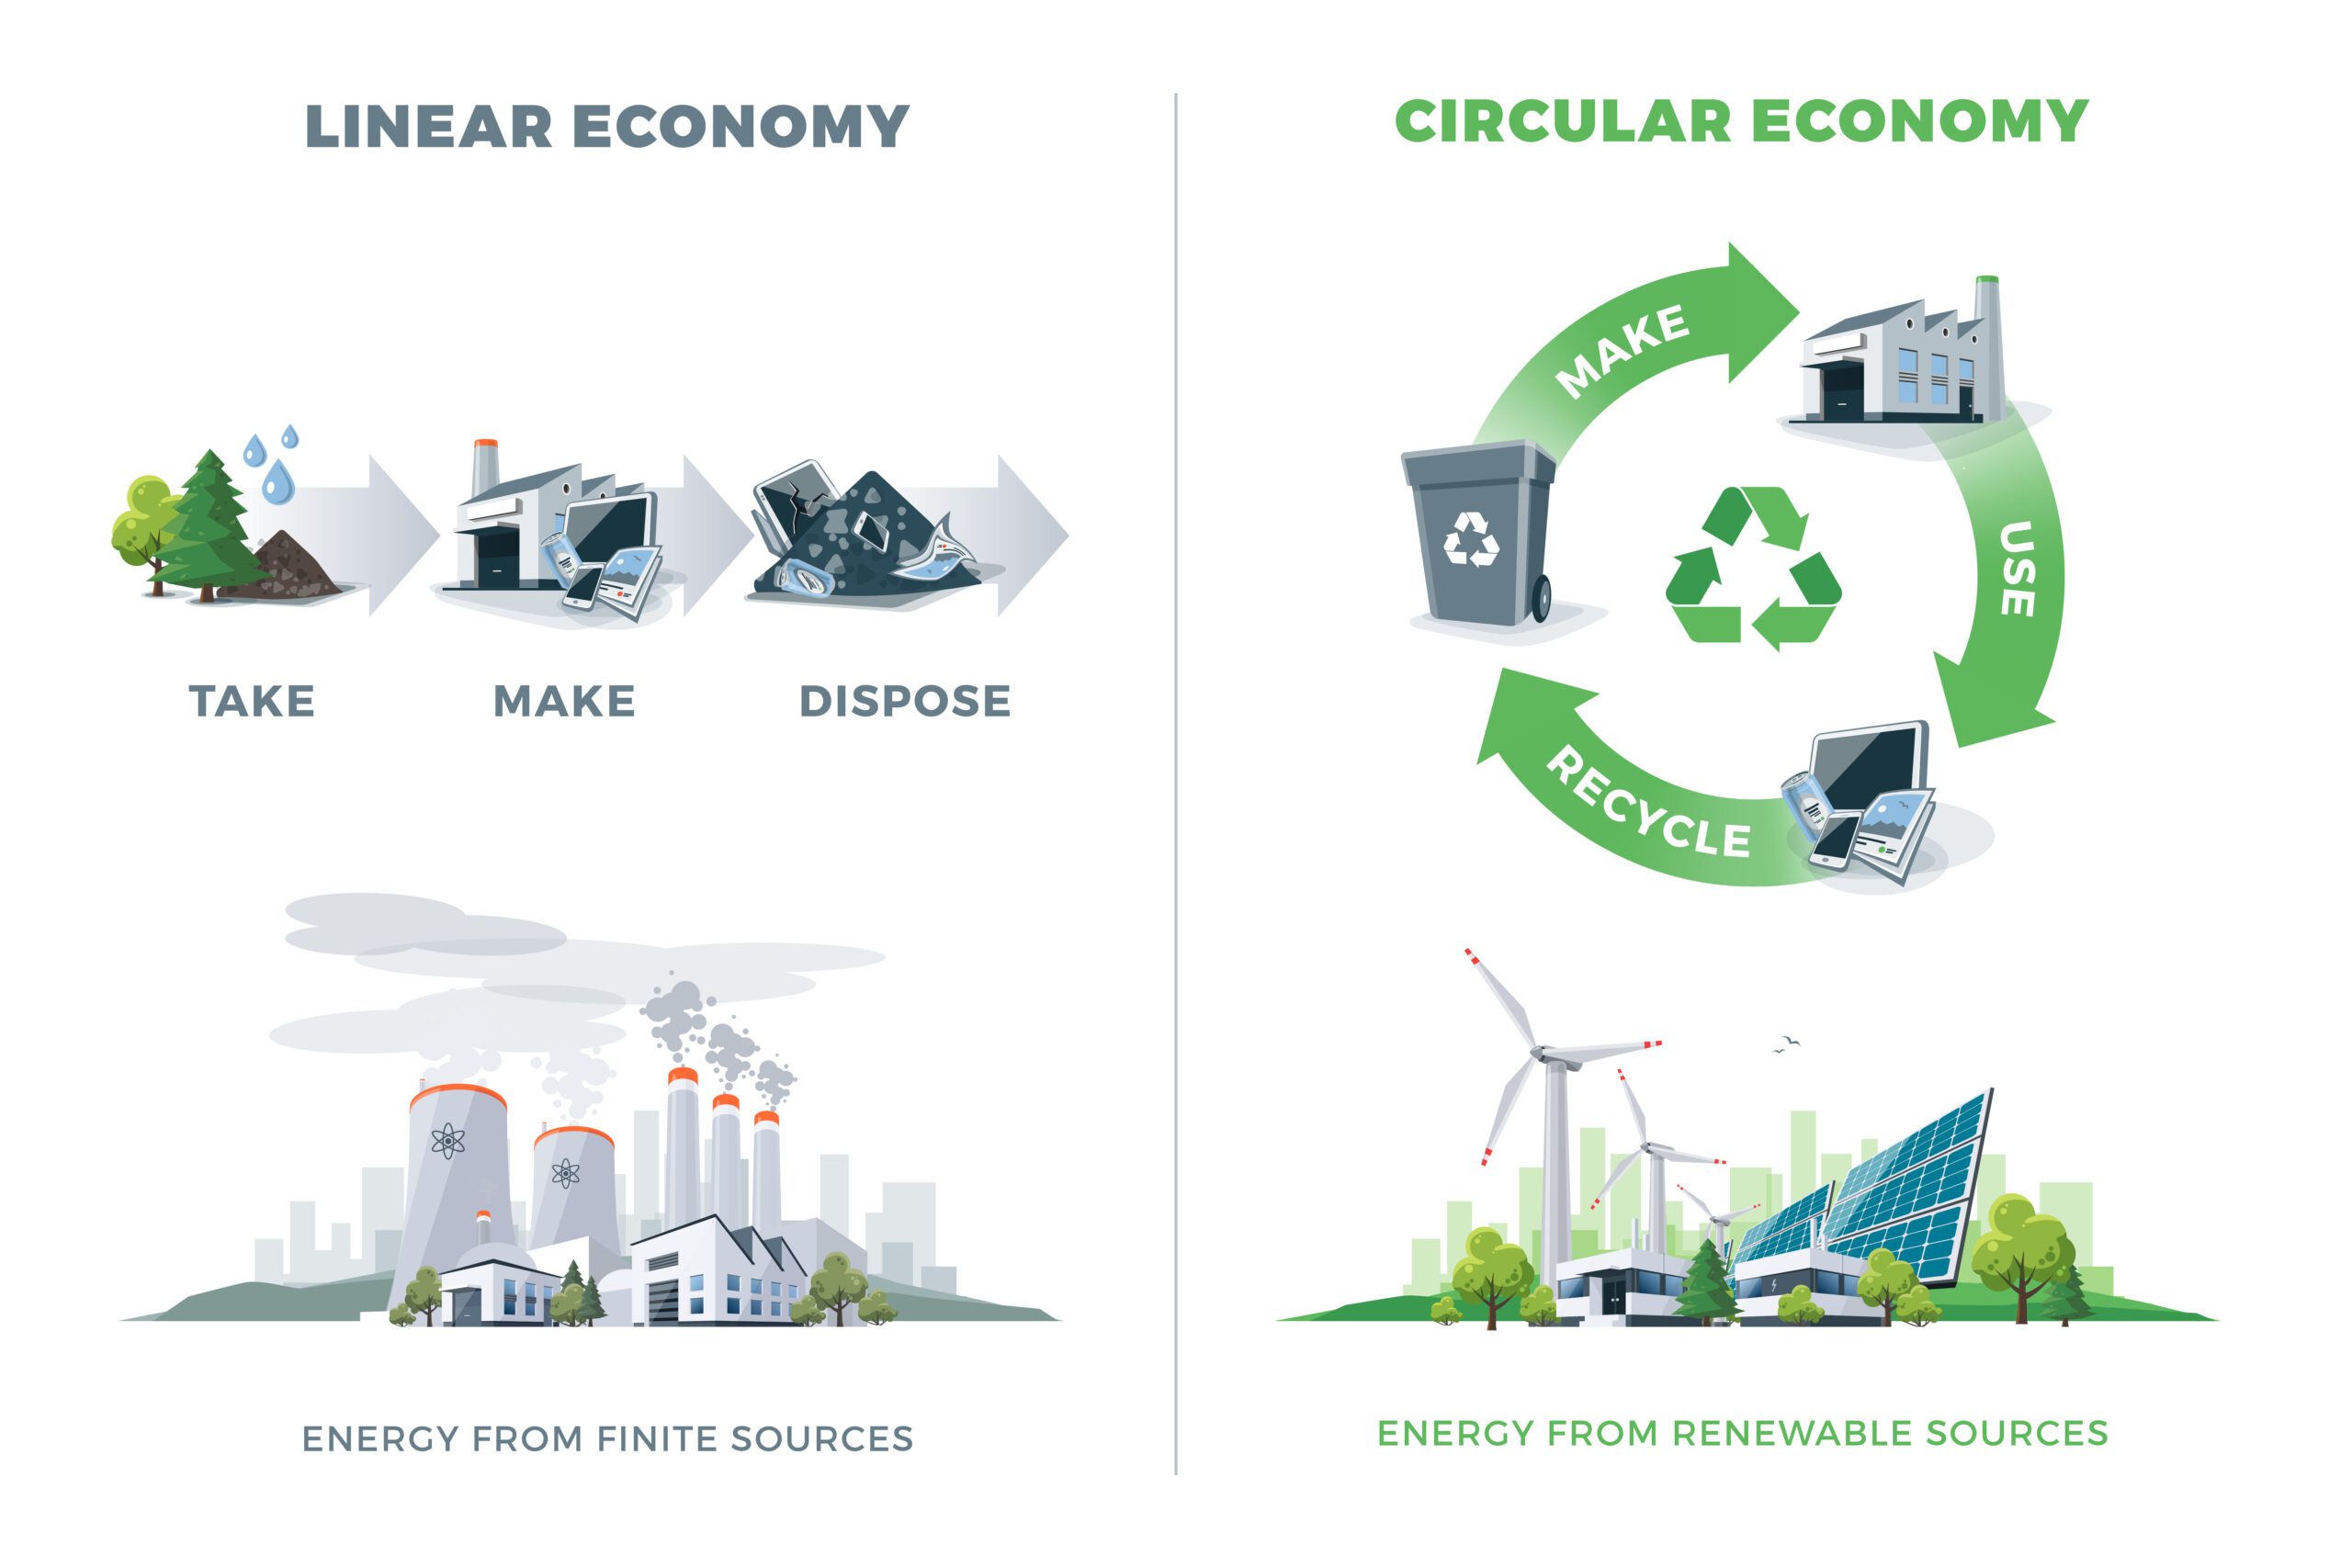 An infographic comparing a linear economy versus a green circular economy.